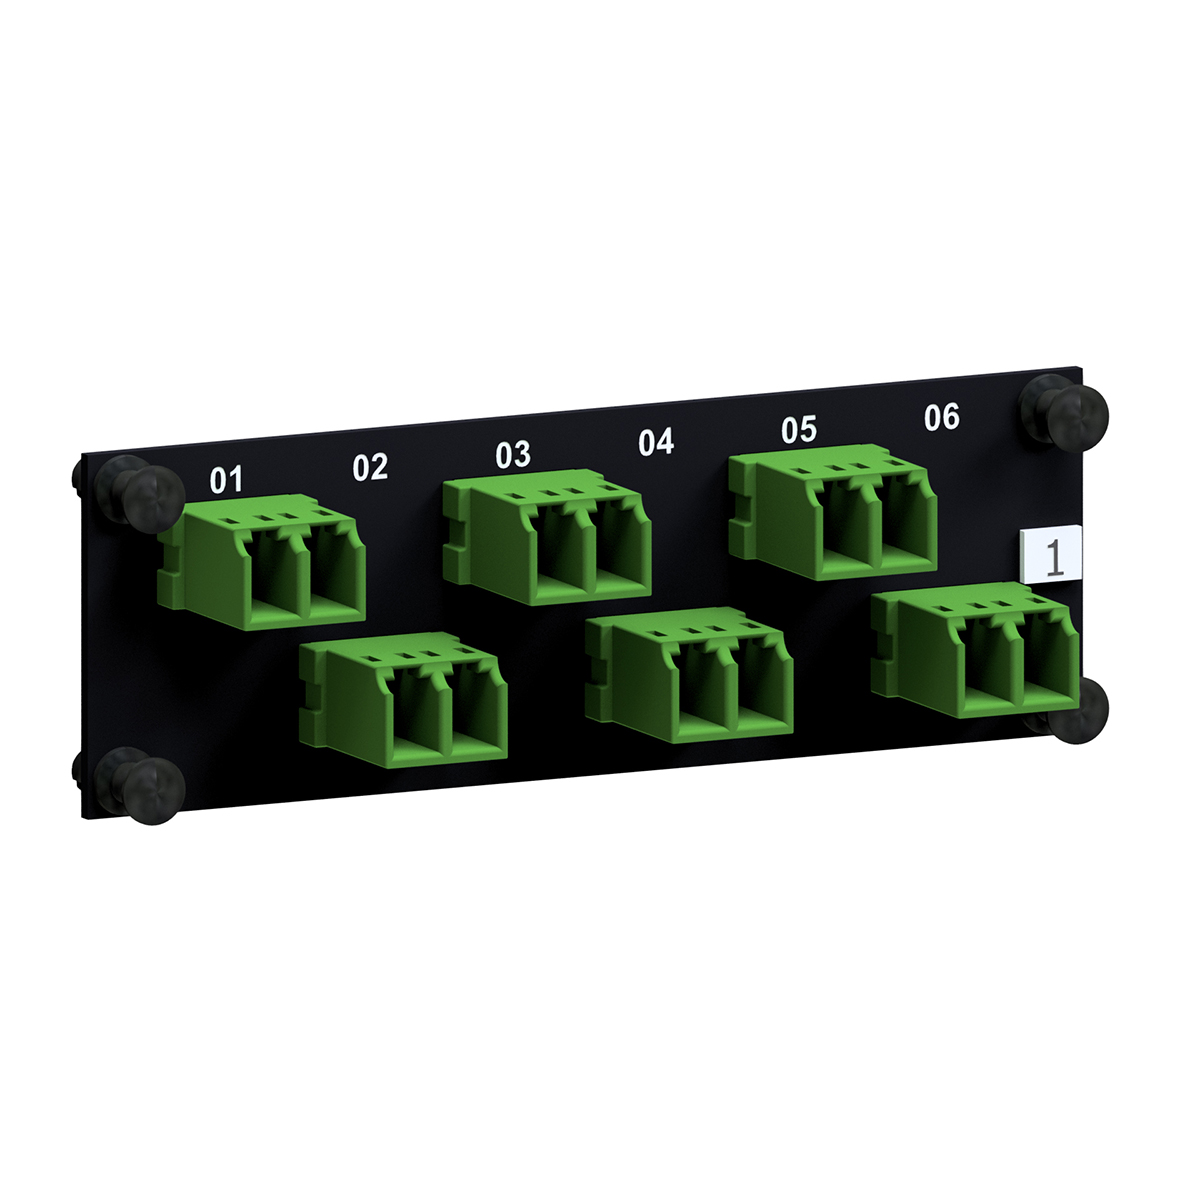 SMAP-G2 SD 1 HU 1/4 part front plate with LC-Duplex APC singlemode OS2 green